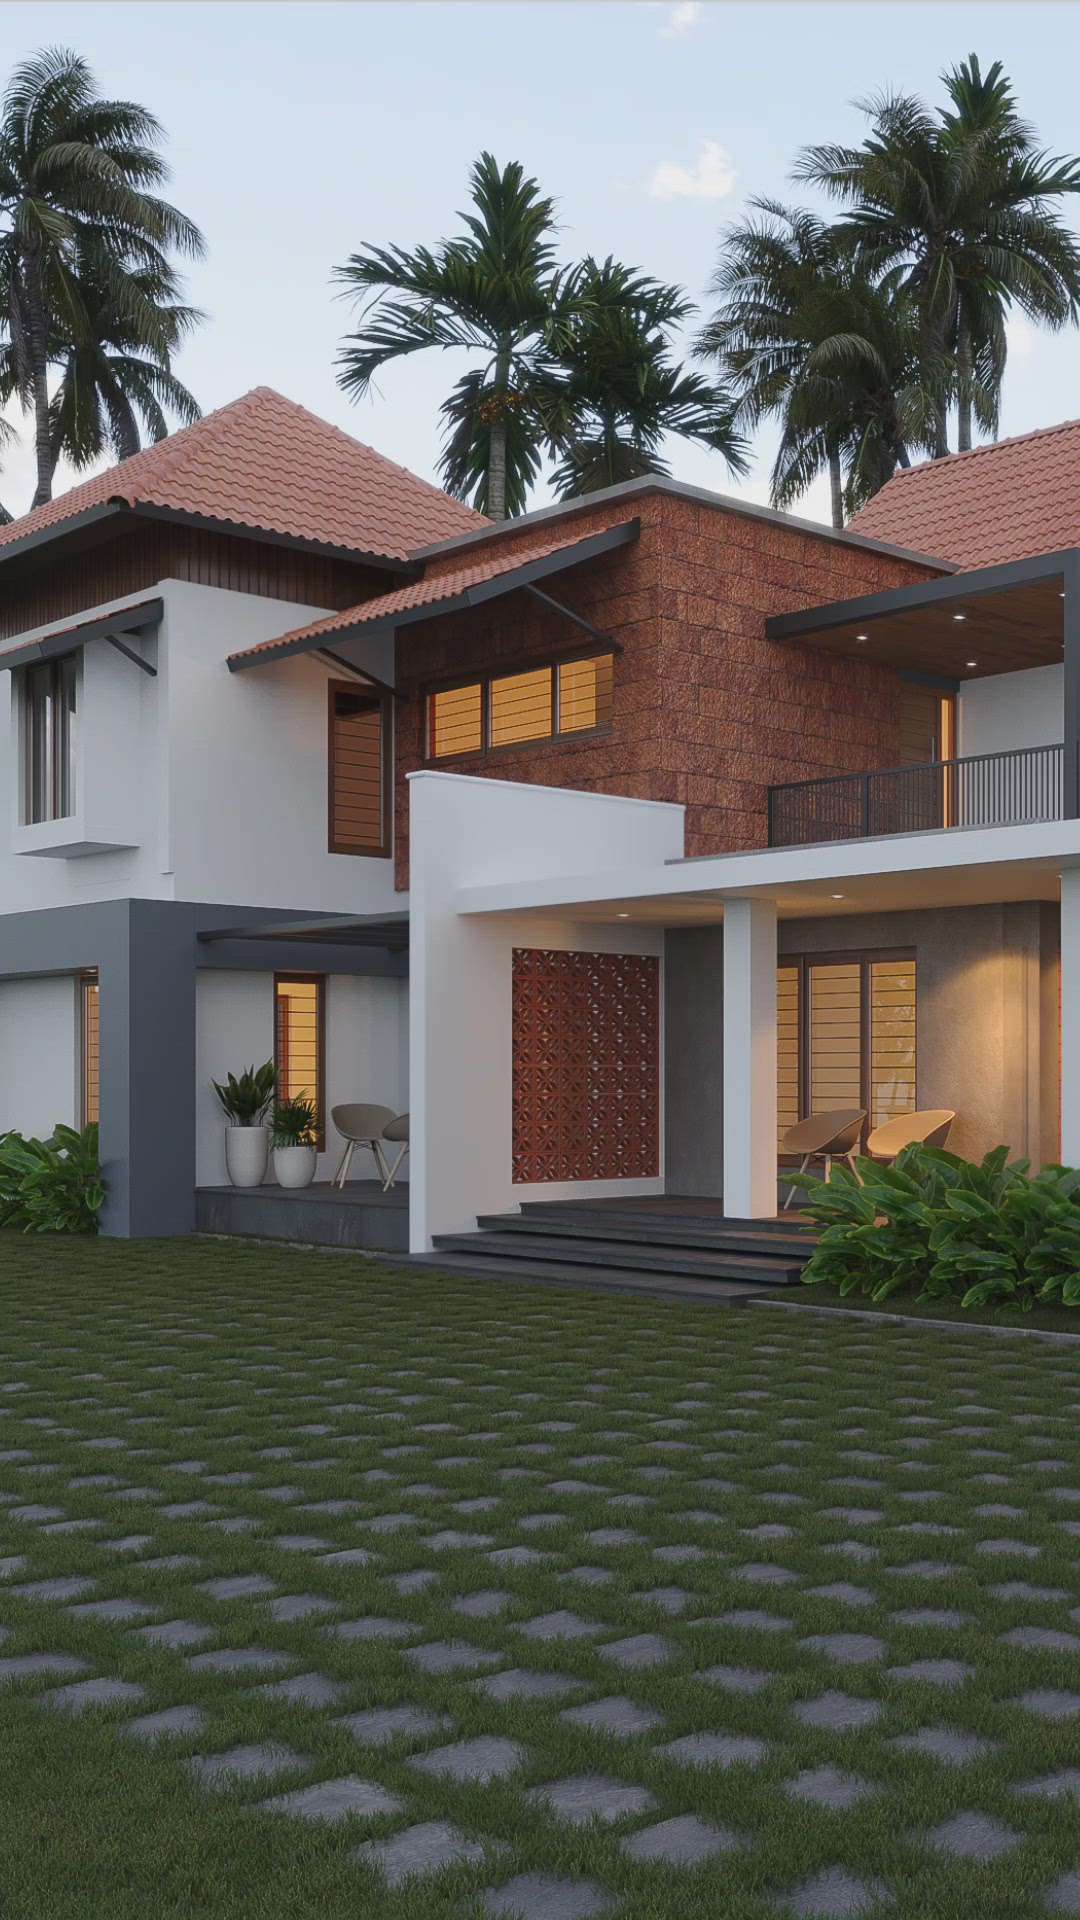 Traditional blend....
Project Location.Thodupuzha
.
.
 #Architectural&Interior  #TraditionalHouse  #HouseDesigns  #MixedRoofHouse  #KeralaStyleHouse  #houseelevation  #exteriordesigns  #dreamhomedesignideas